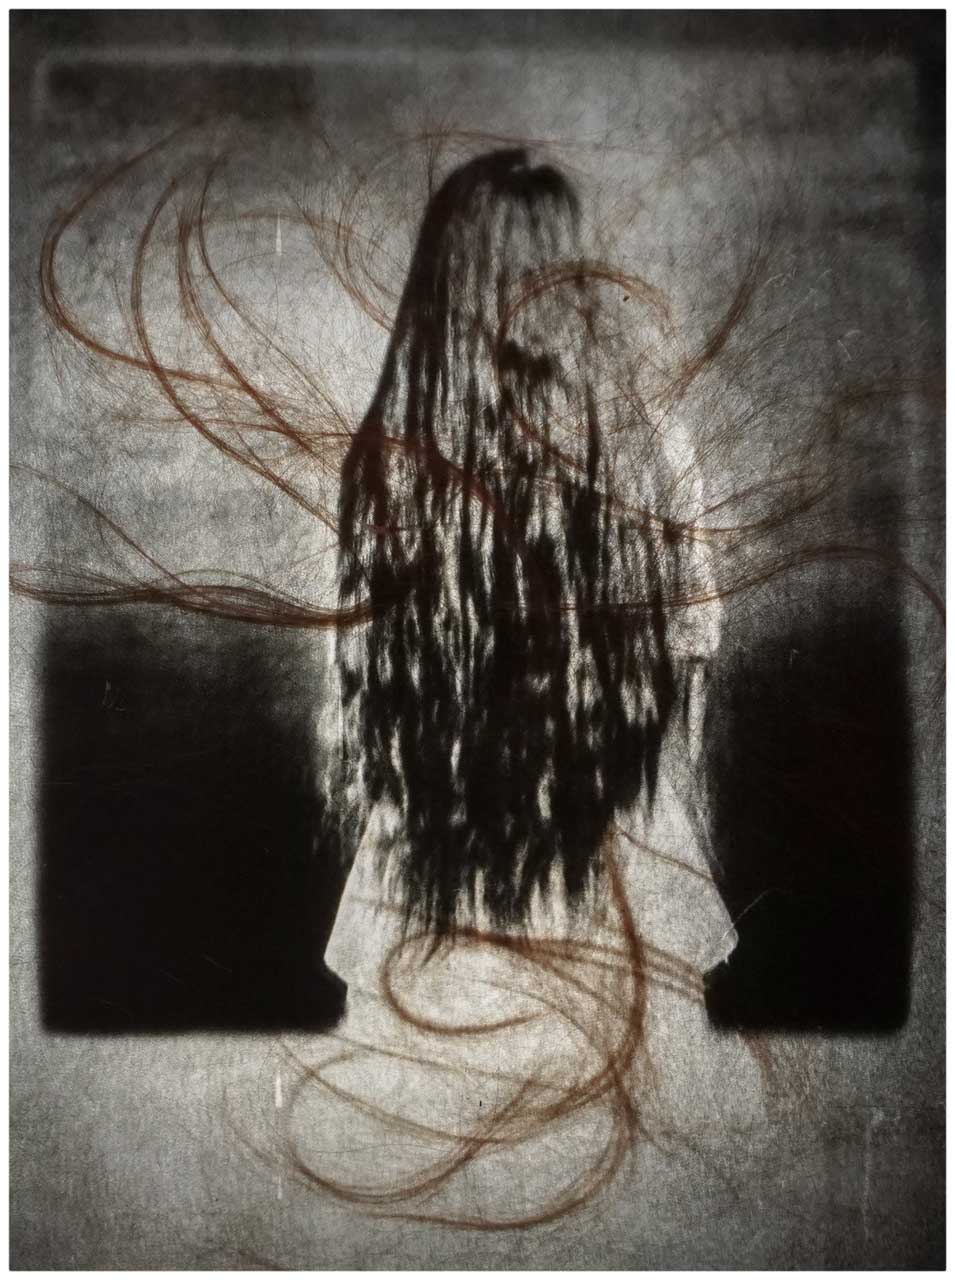 André Werner, from the series „Her Hair“ (Her Hair II, 2023) Fine Art print on Baryte paper, Edition of 5 | 2 AP 40 x 30cm (print), 39 x 29 cm Passepartout, 50 x 40 cm (framed) signed, dated and numbered